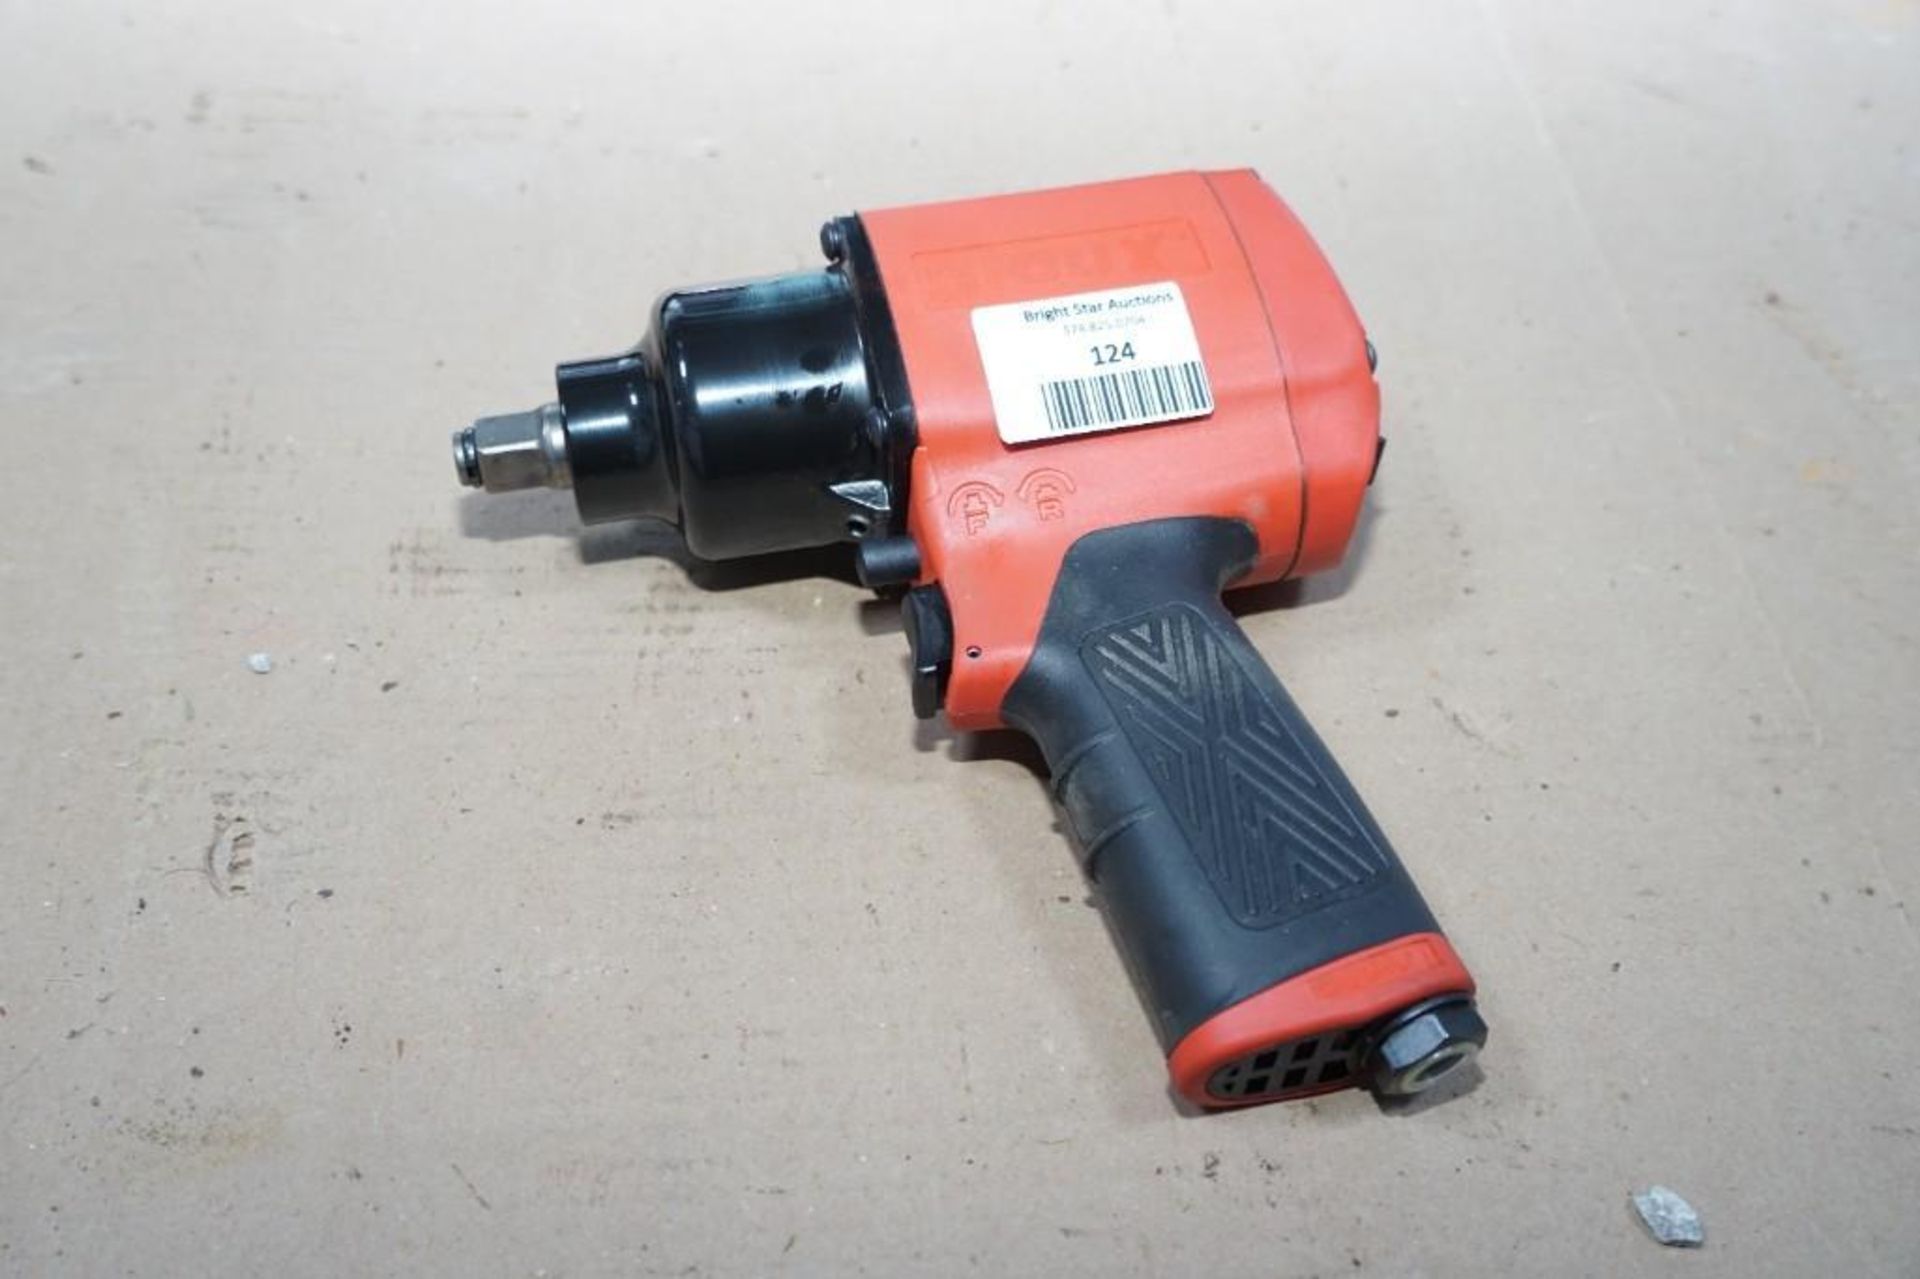 1/2" Sioux Impact Wrench